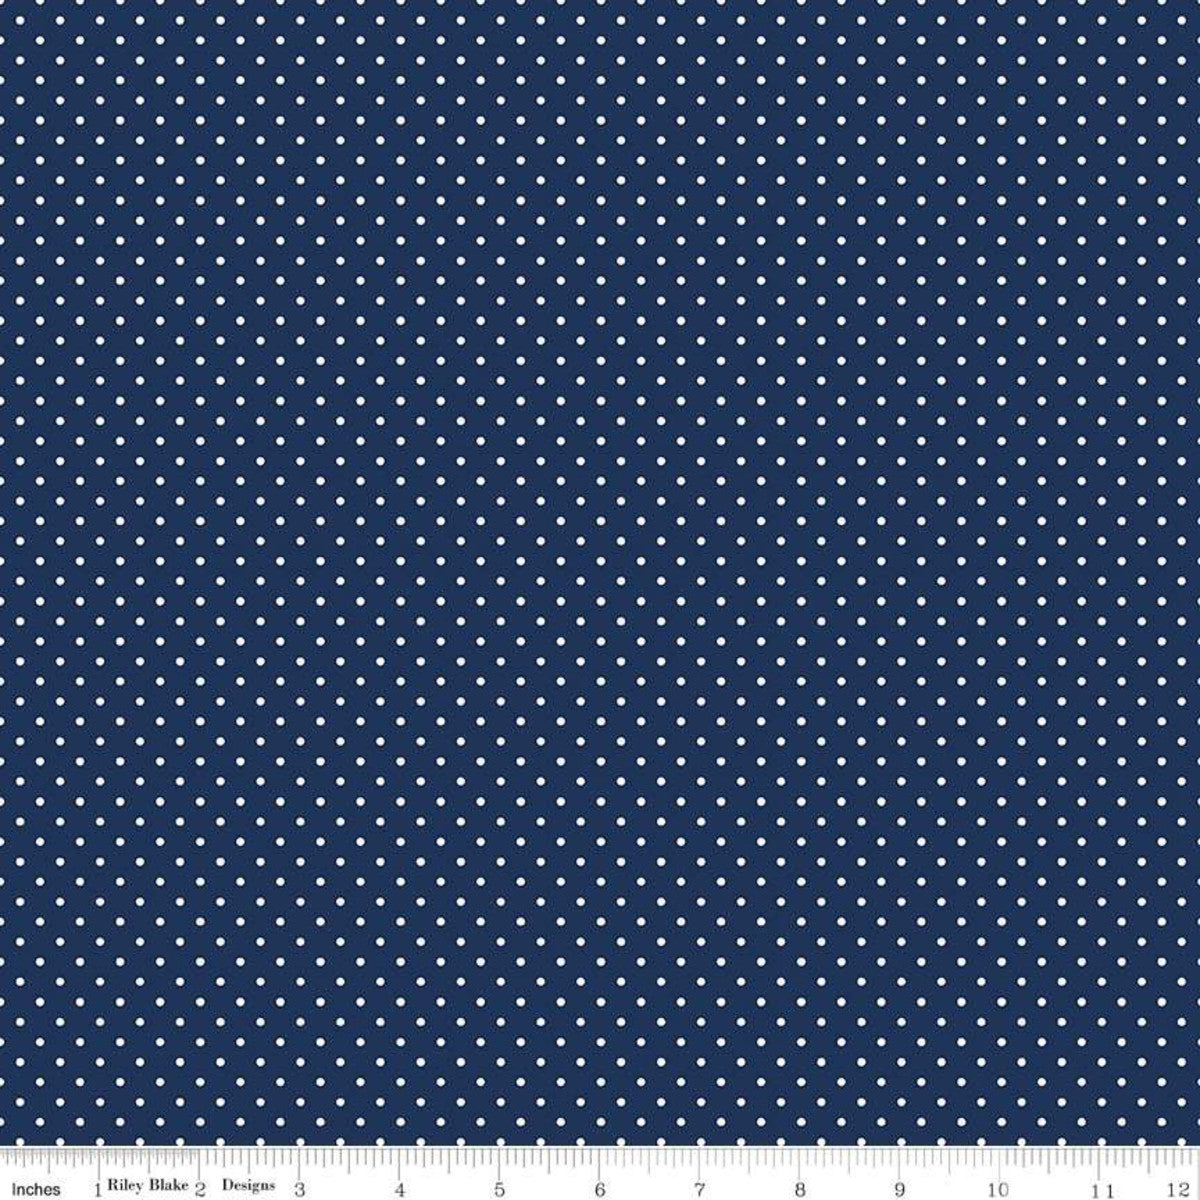 White Swiss (Polka) Dots - Navy Background Fabric, 100% Cotton, Ref. C670-21 NAVY, Swiss Dots Collection by Riley Blake Designs®